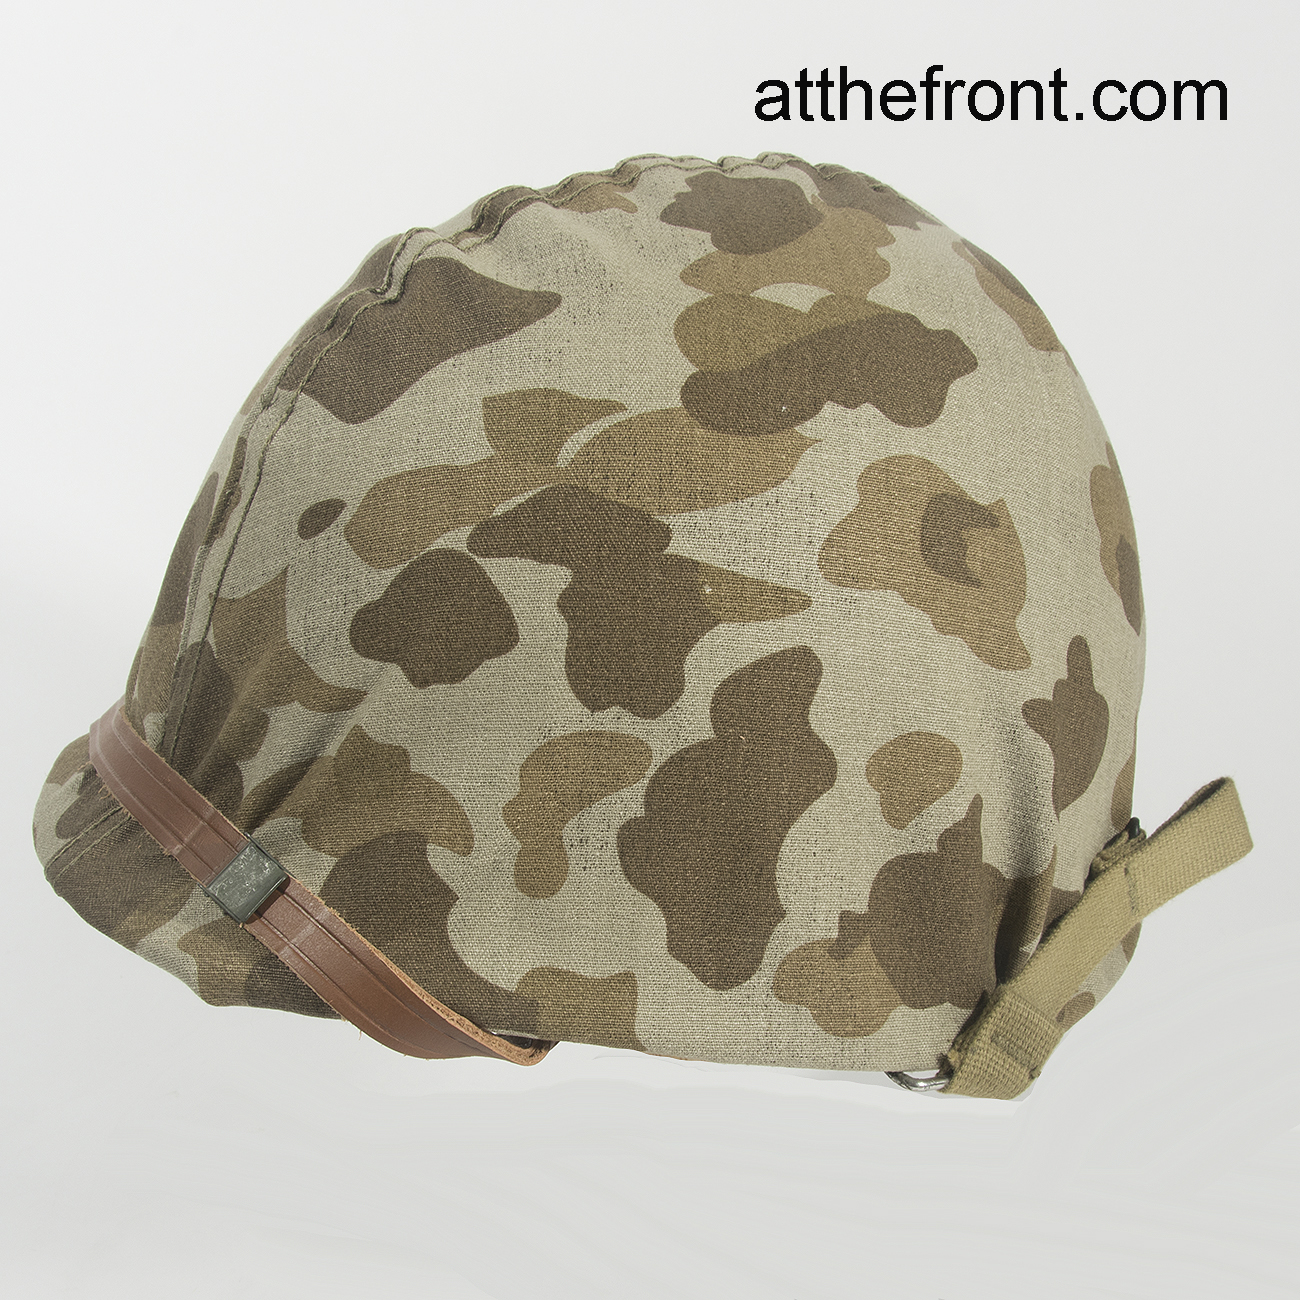 WWII USMC Aged Original M1 Infantry Helmet Fix Bale Shell And Liner Wi ...